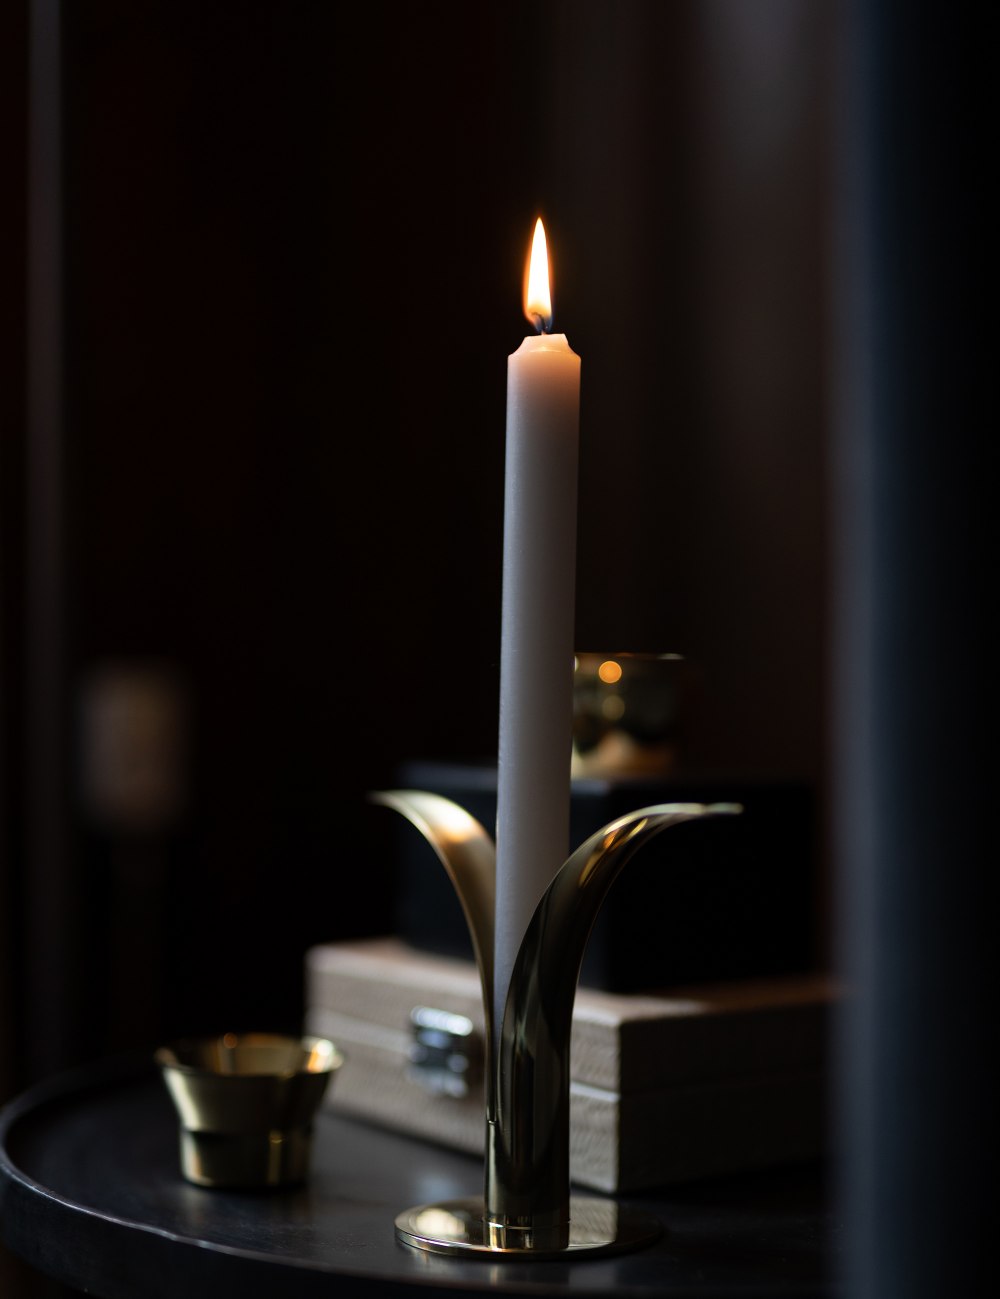 The Lily Candlestick